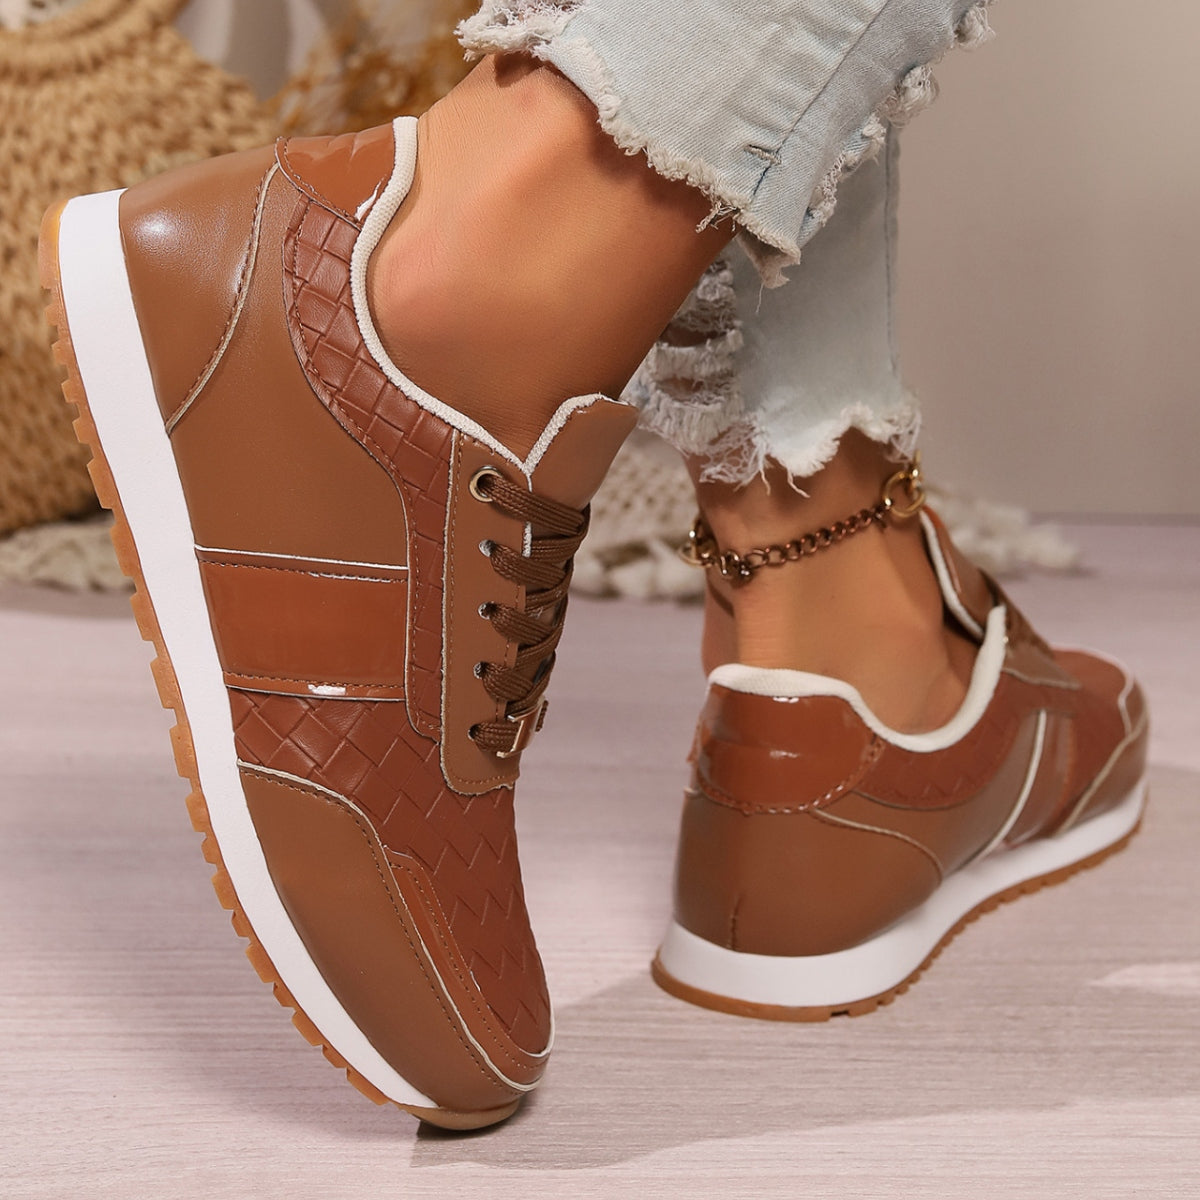 Lace-Up PU Leather Sneakers - Thandynie